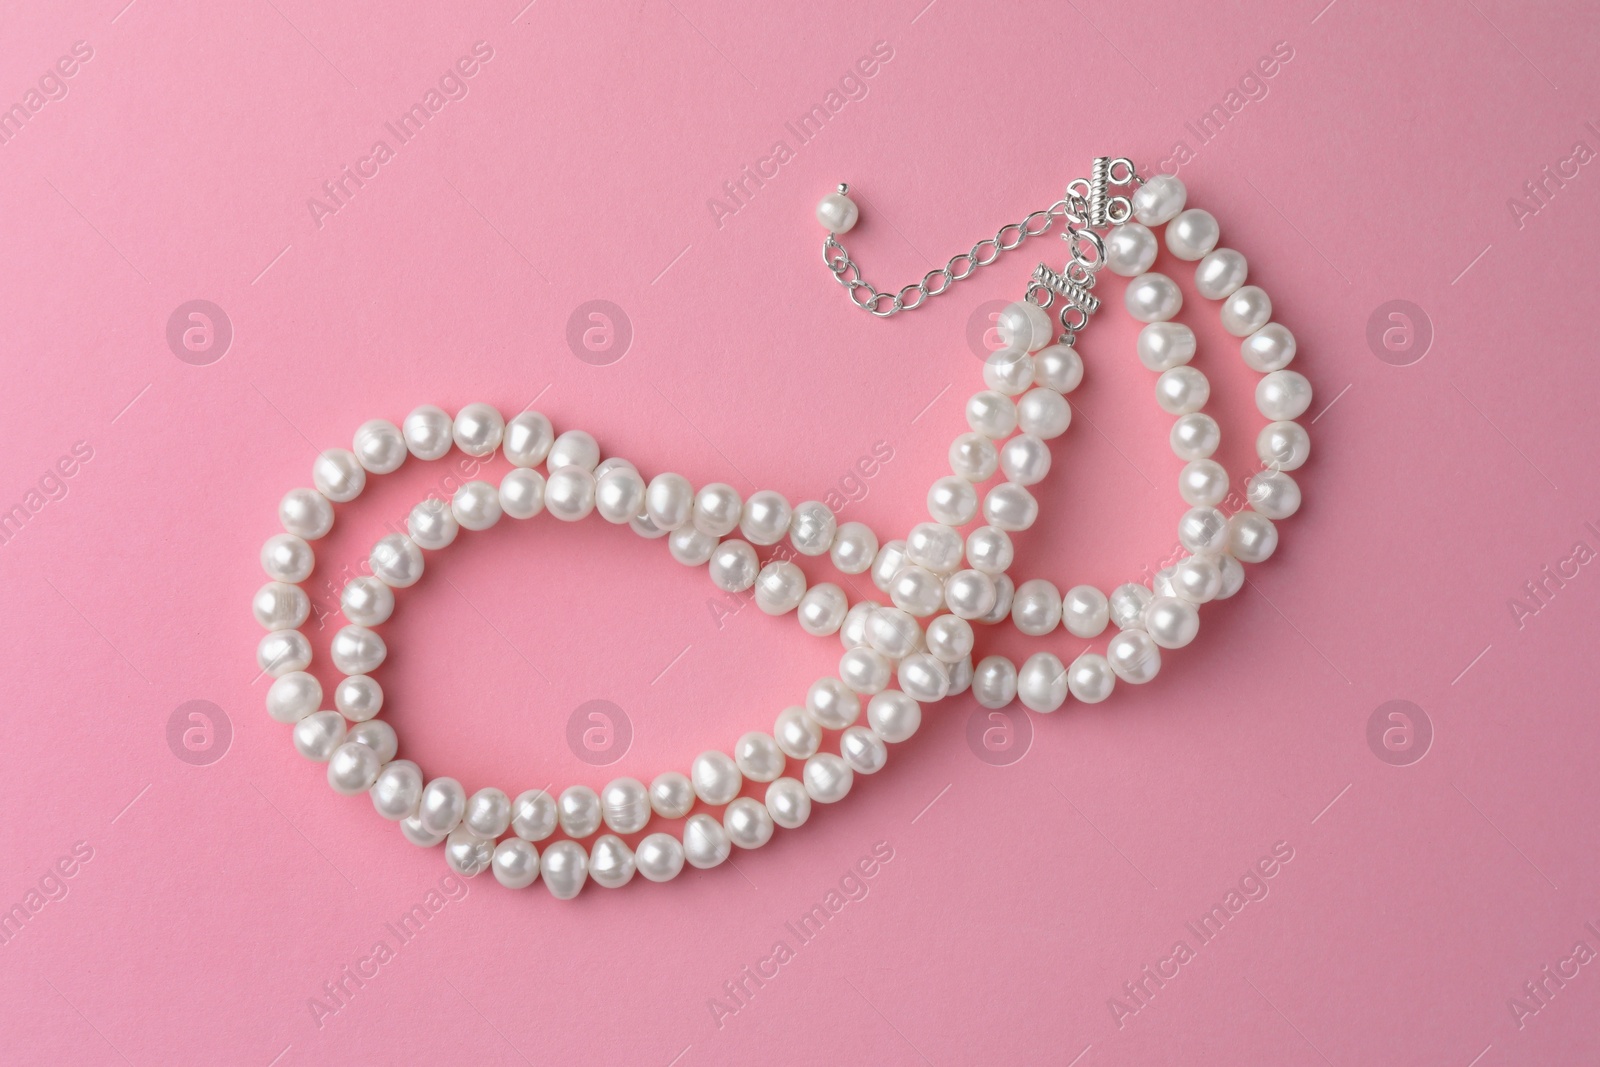 Photo of Elegant necklace with pearls on pink background, top view